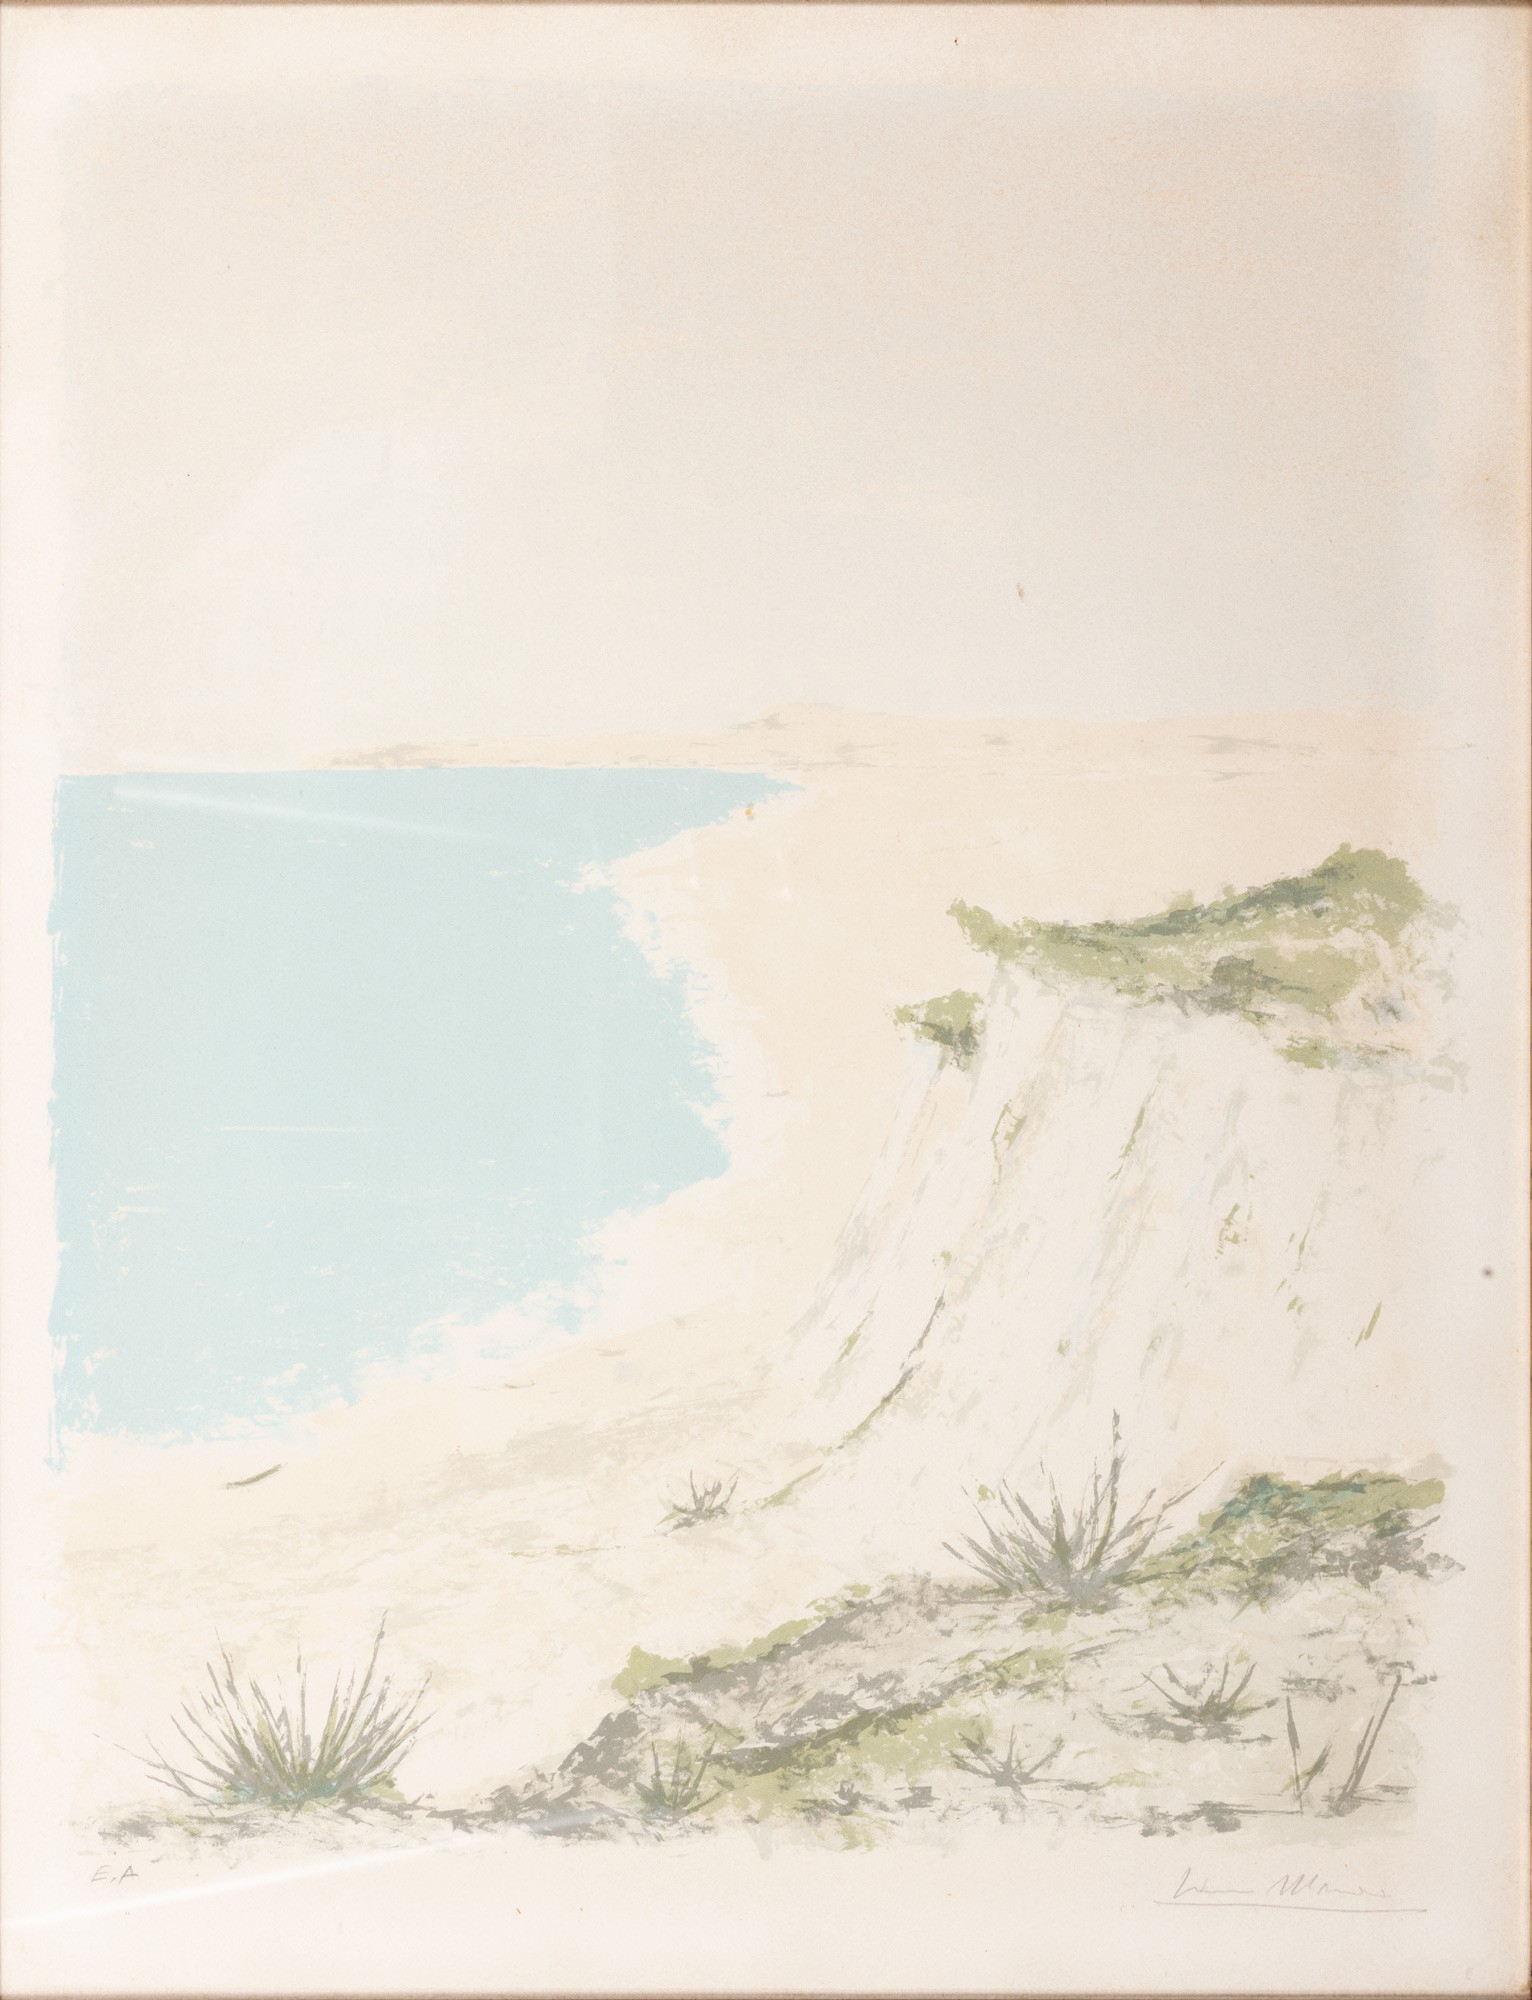 Glimpse of the coast 20th century, lithograph on paperE.A., signed in pencil, framed47 x 36 cm - Image 2 of 8